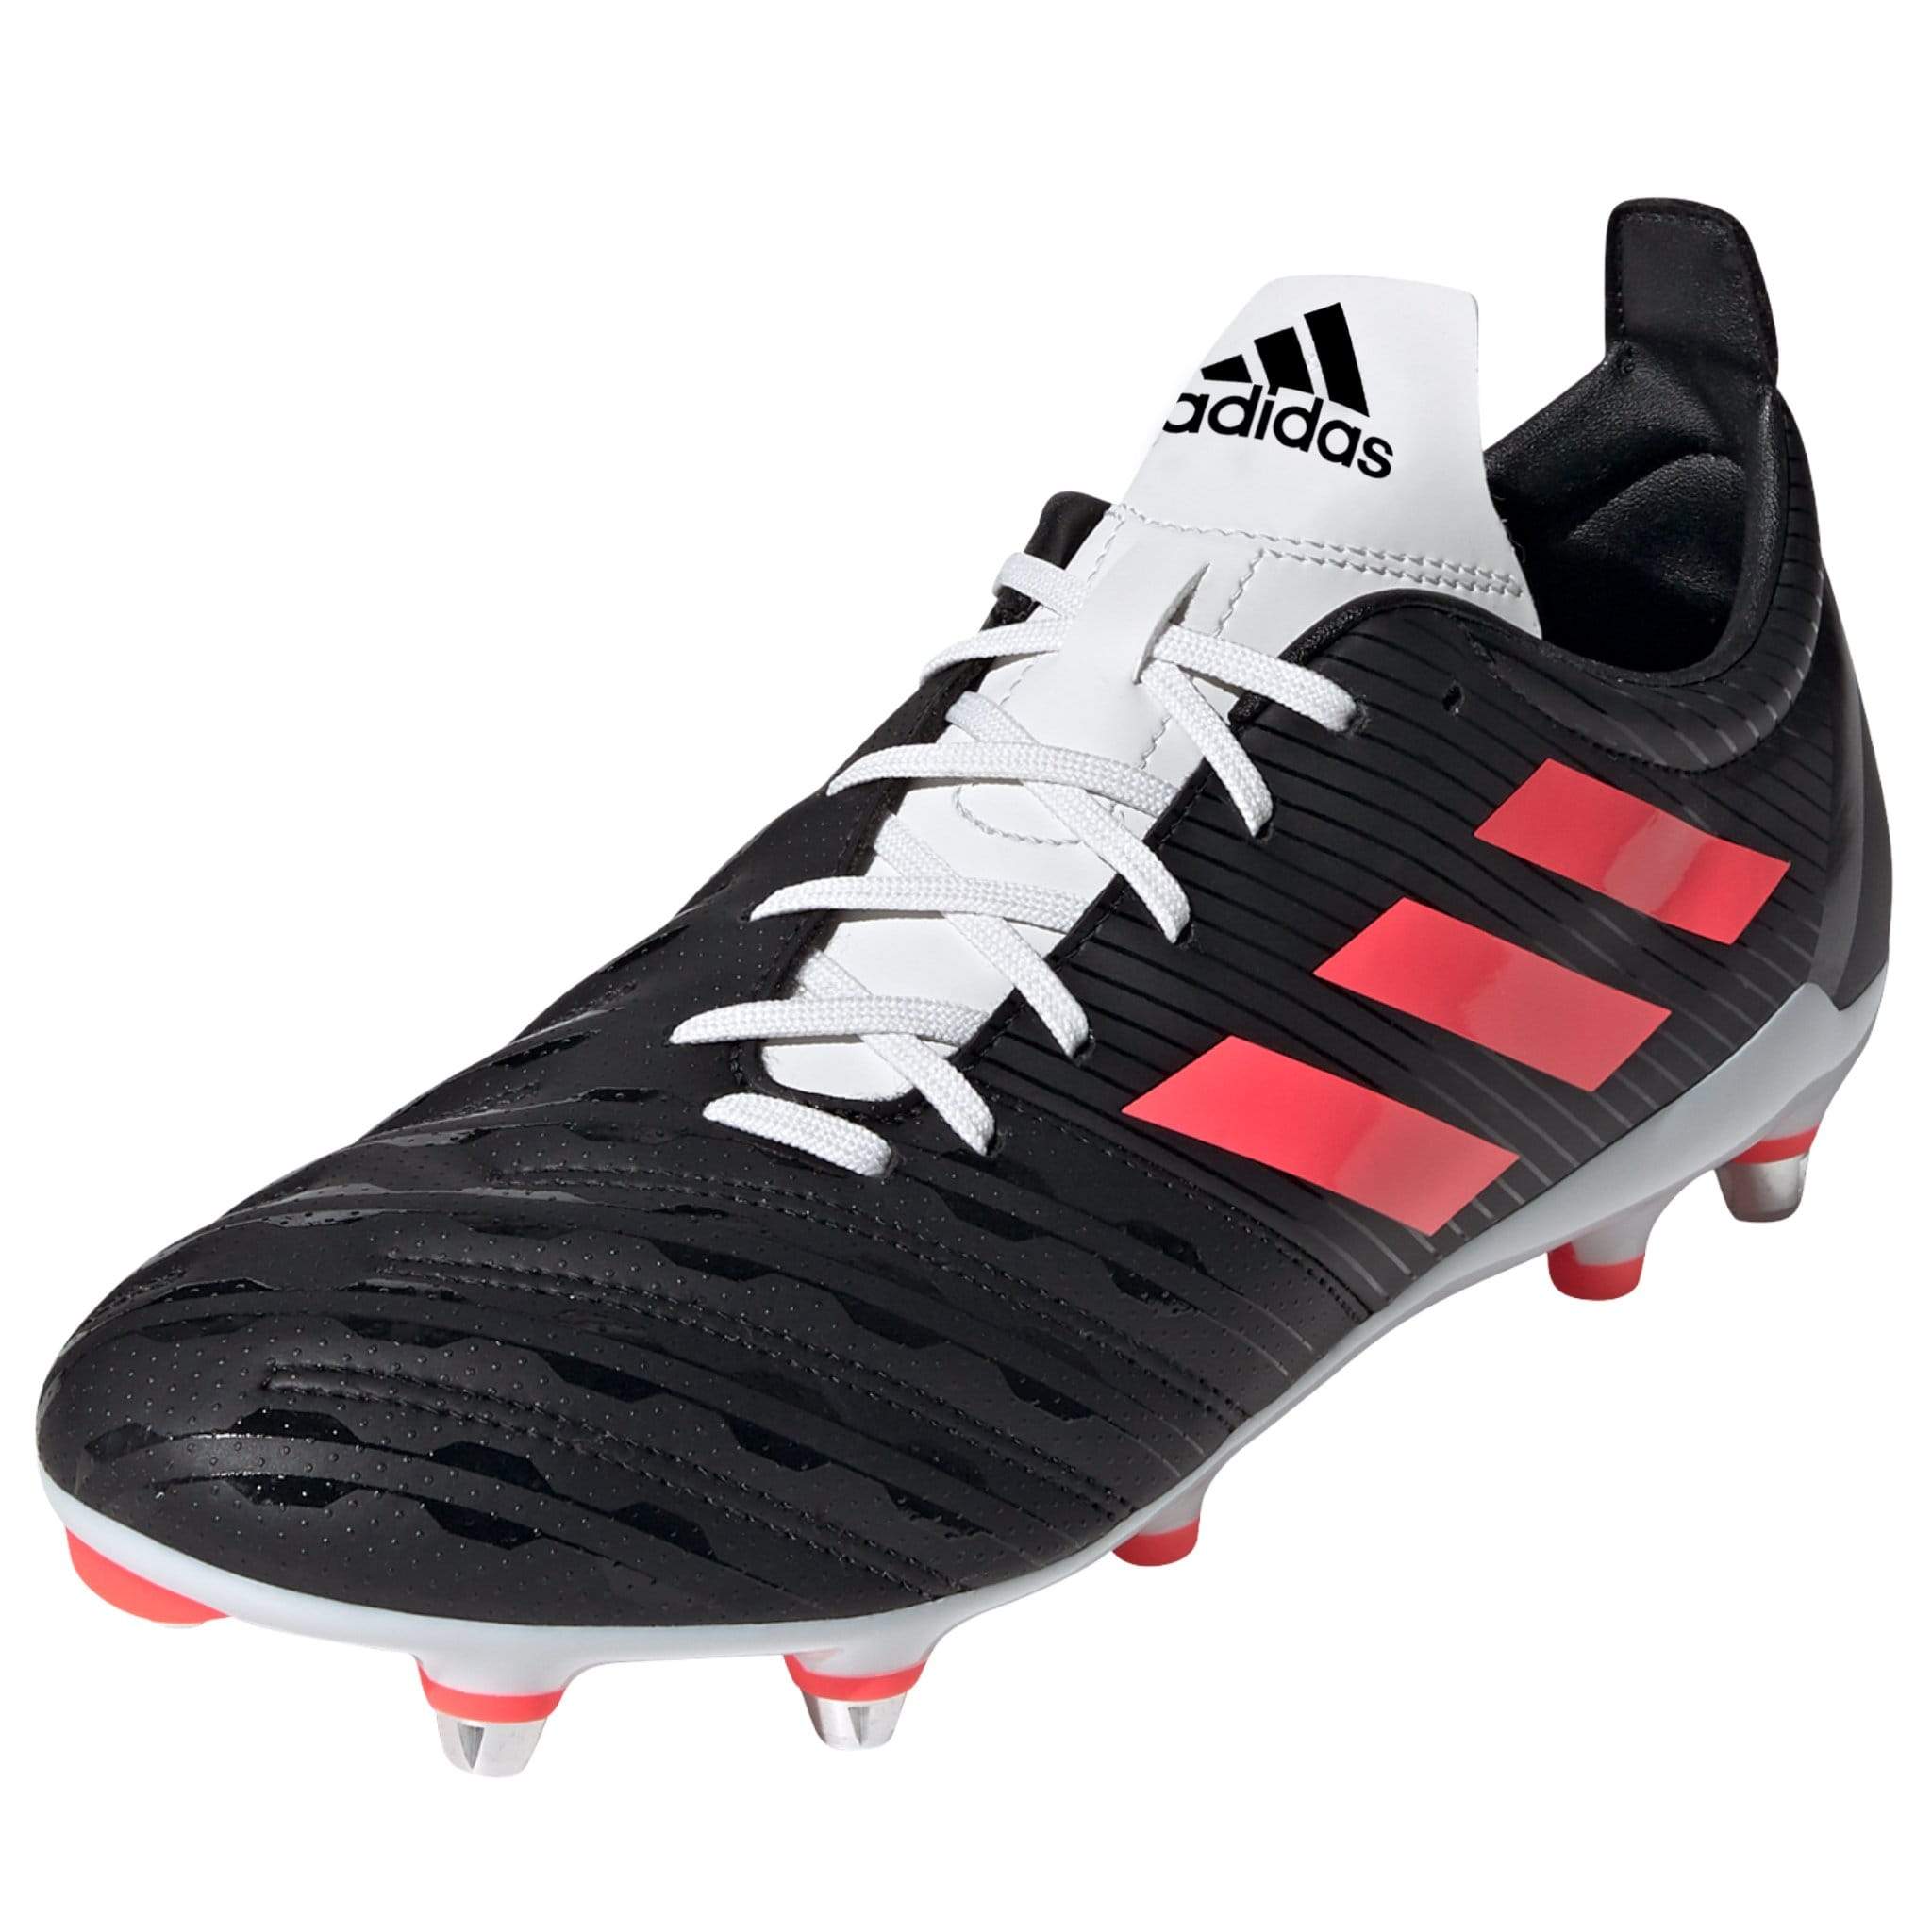 Adidas Malice Cleat - Soft Ground Boot - Core Black/ Signal Pink/ Crystal White - SKU FU8214 - World Rugby Shop